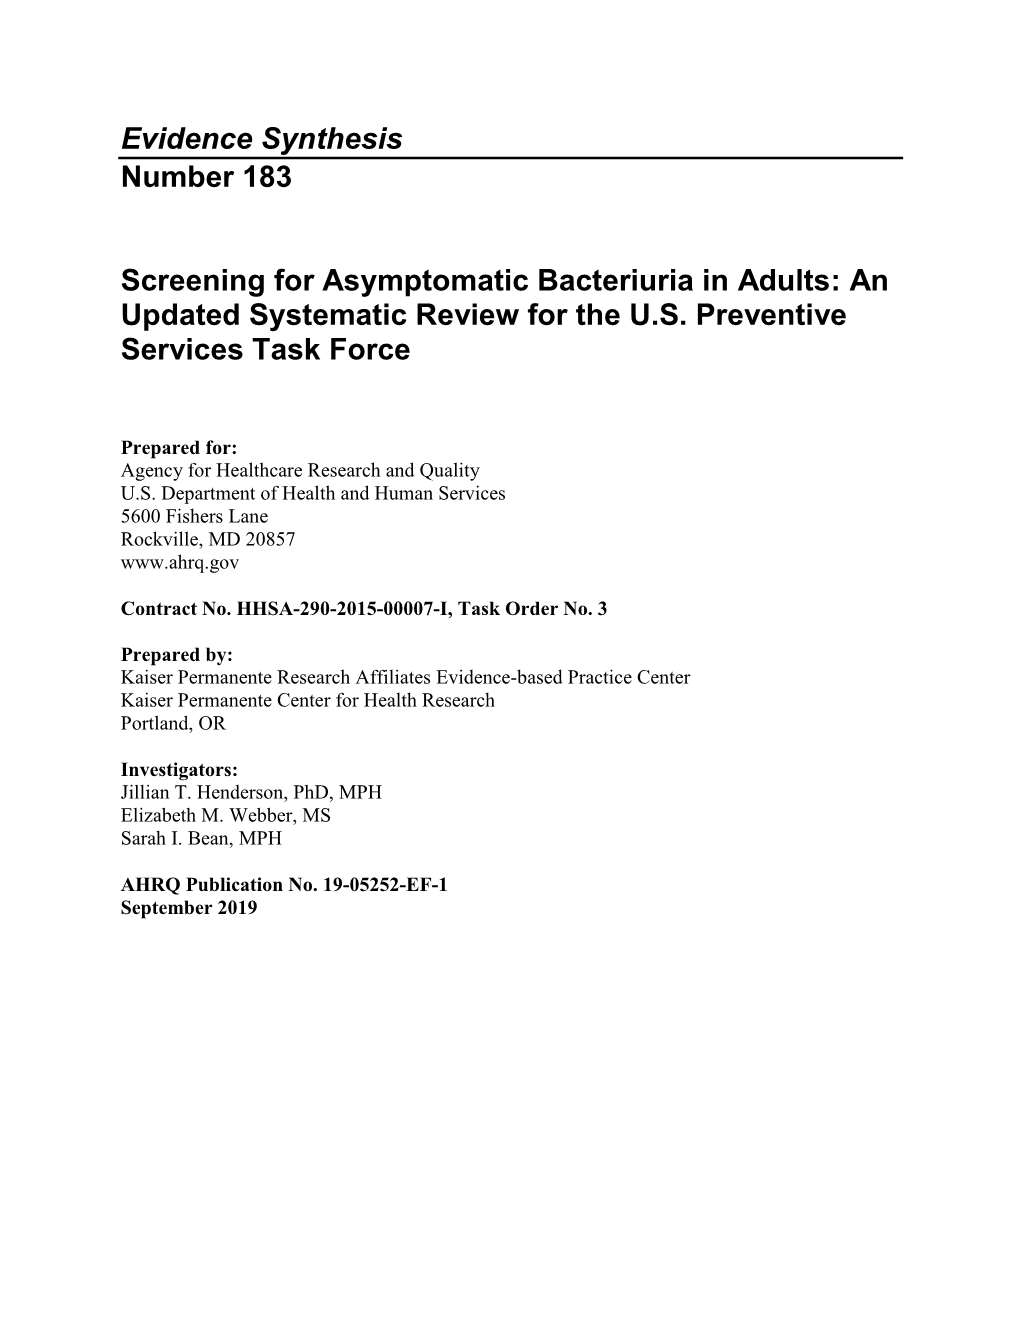 Screening for Asymptomatic Bacteriuria in Adults: an Updated Systematic Review for the U.S